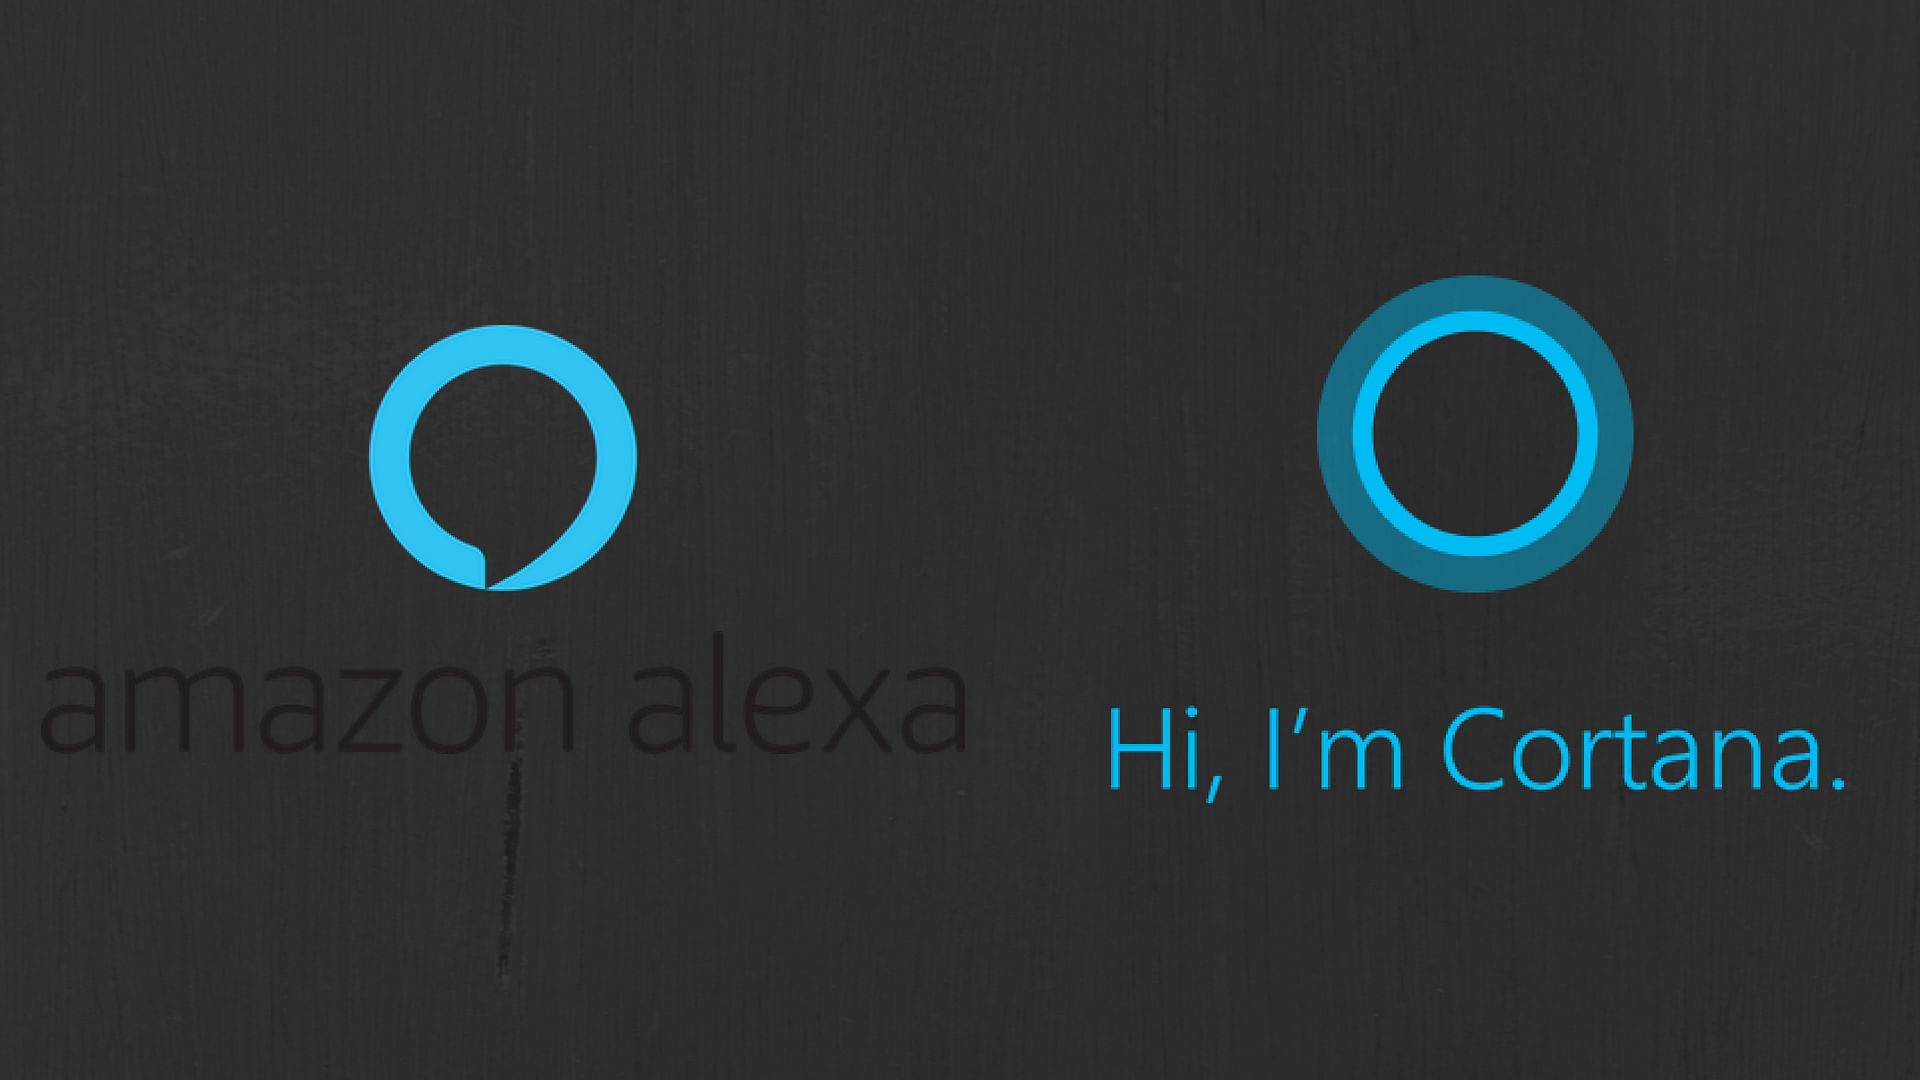 Alexa – Cortana Integration Now Available for Public Preview